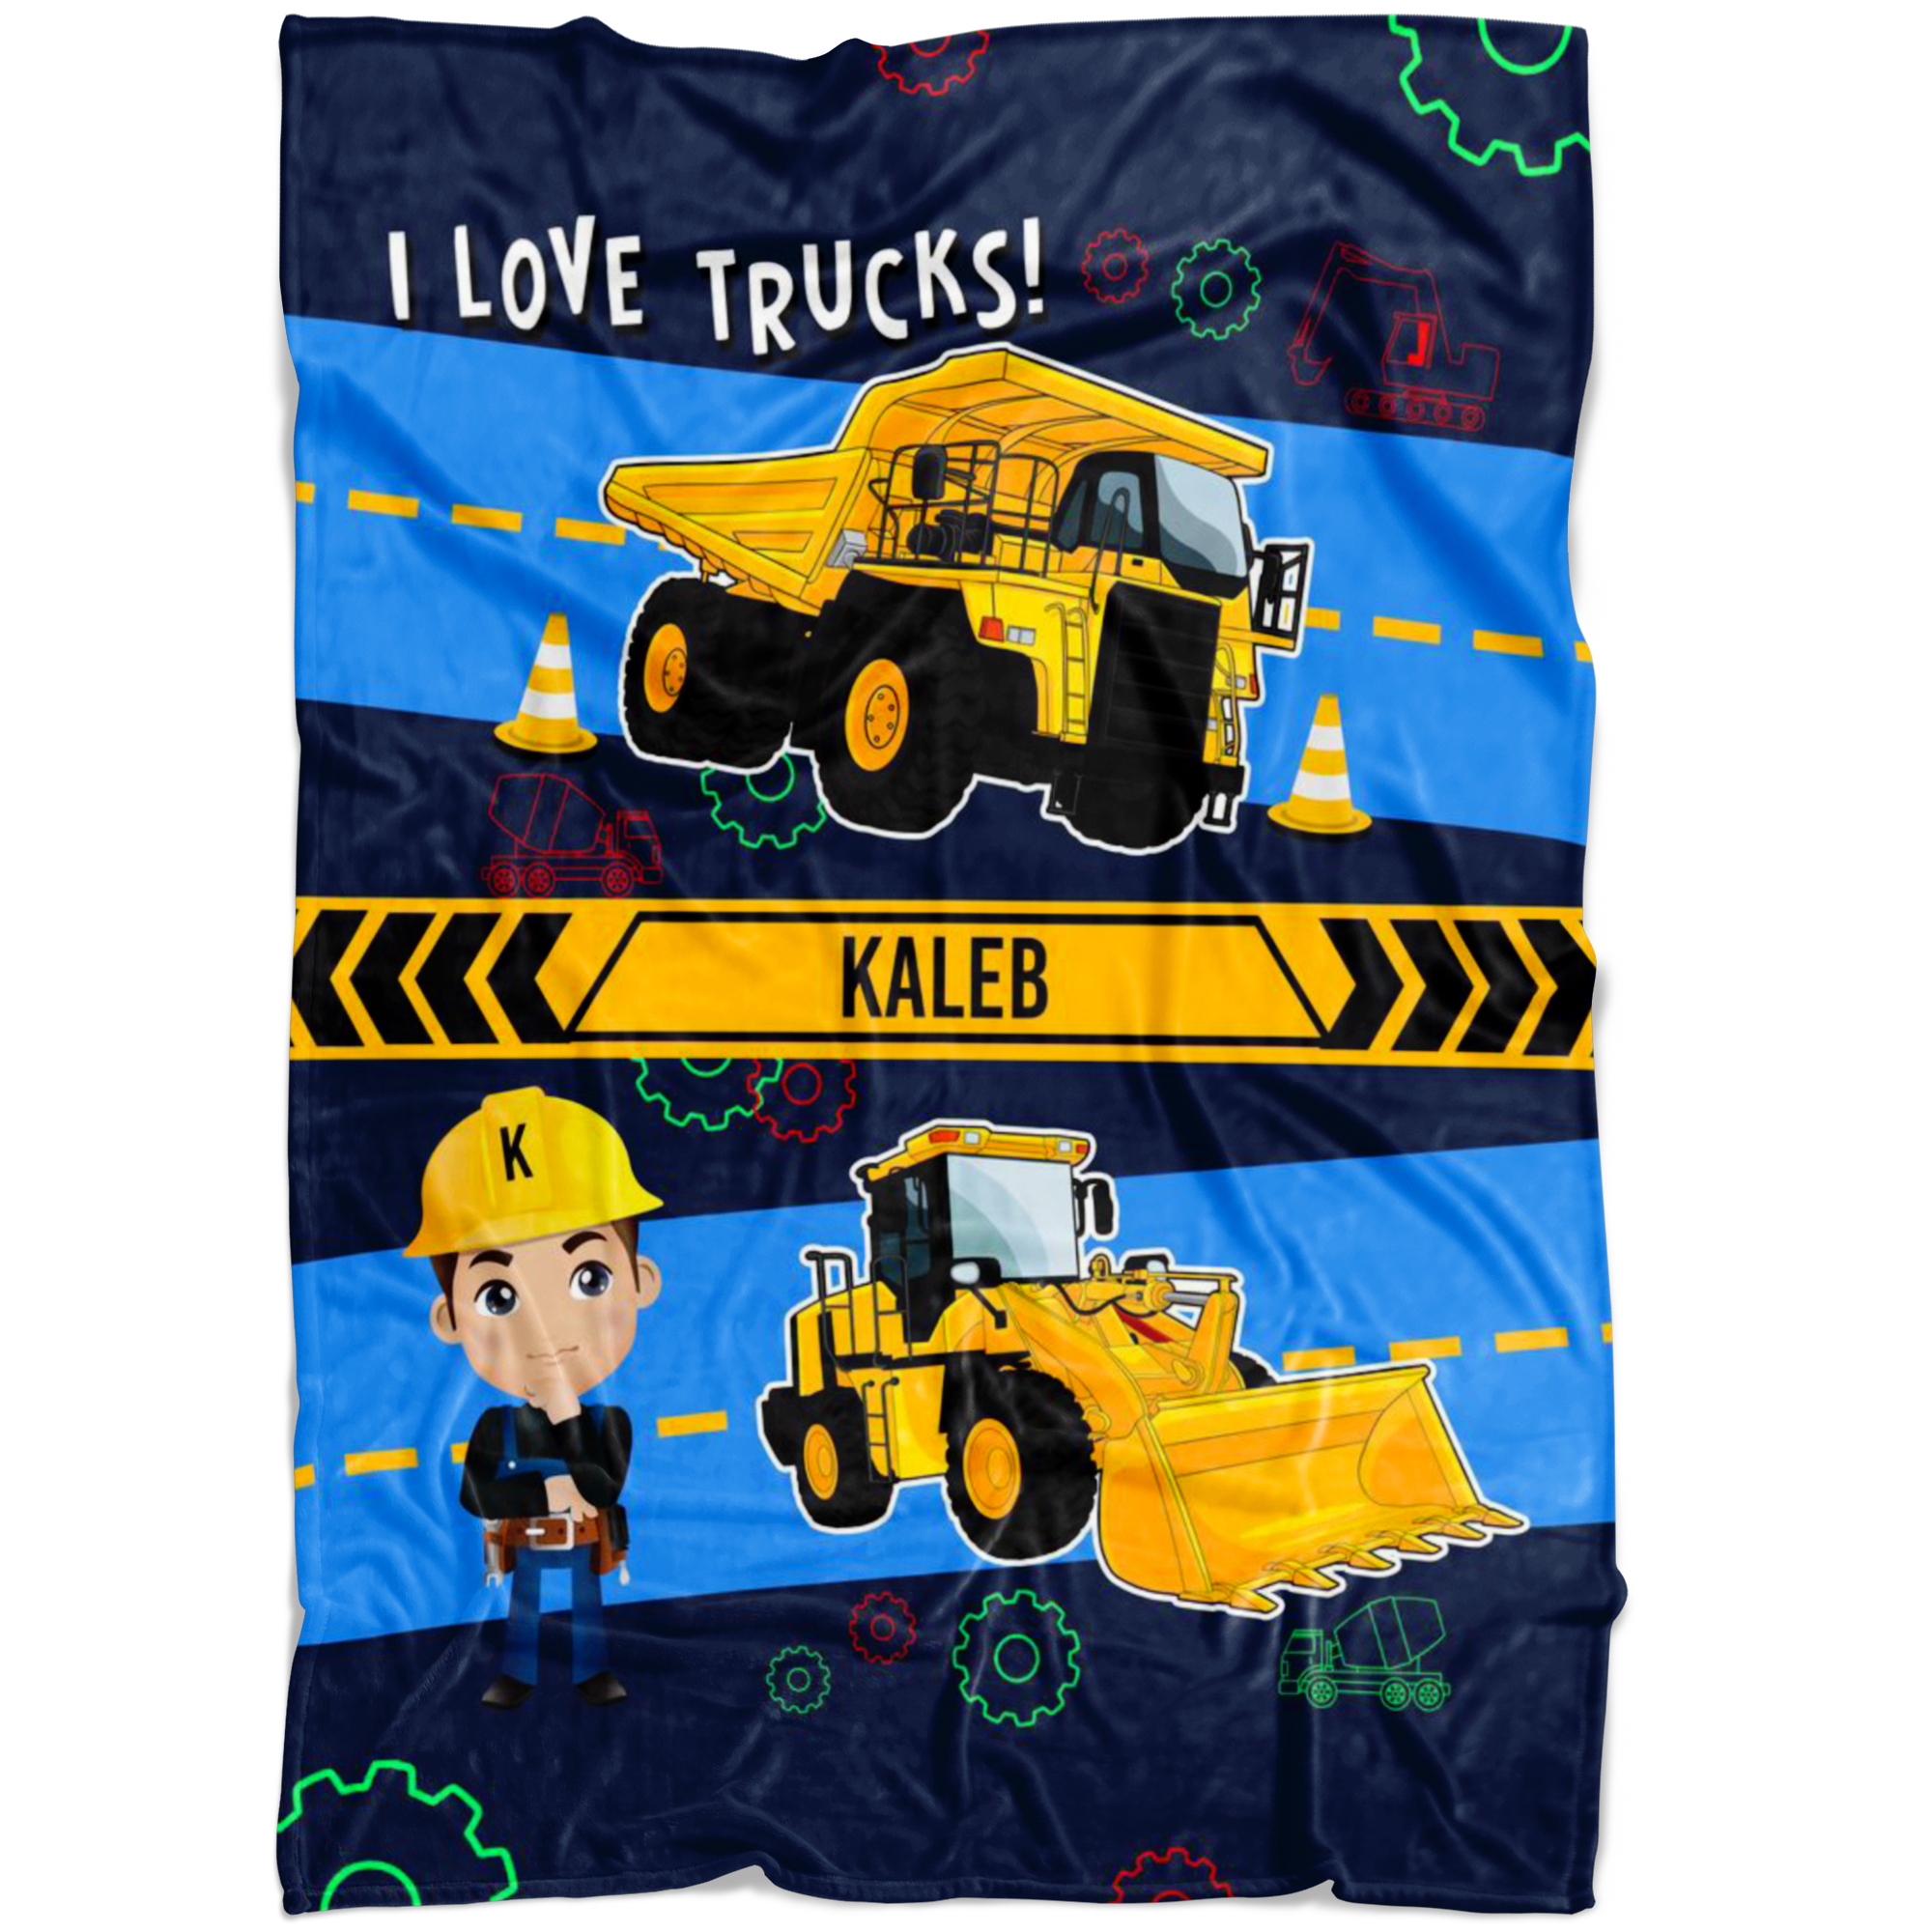 Personalized Name I Love Trucks Blanket for Boys & Girls with Character Personalization - Kaleb